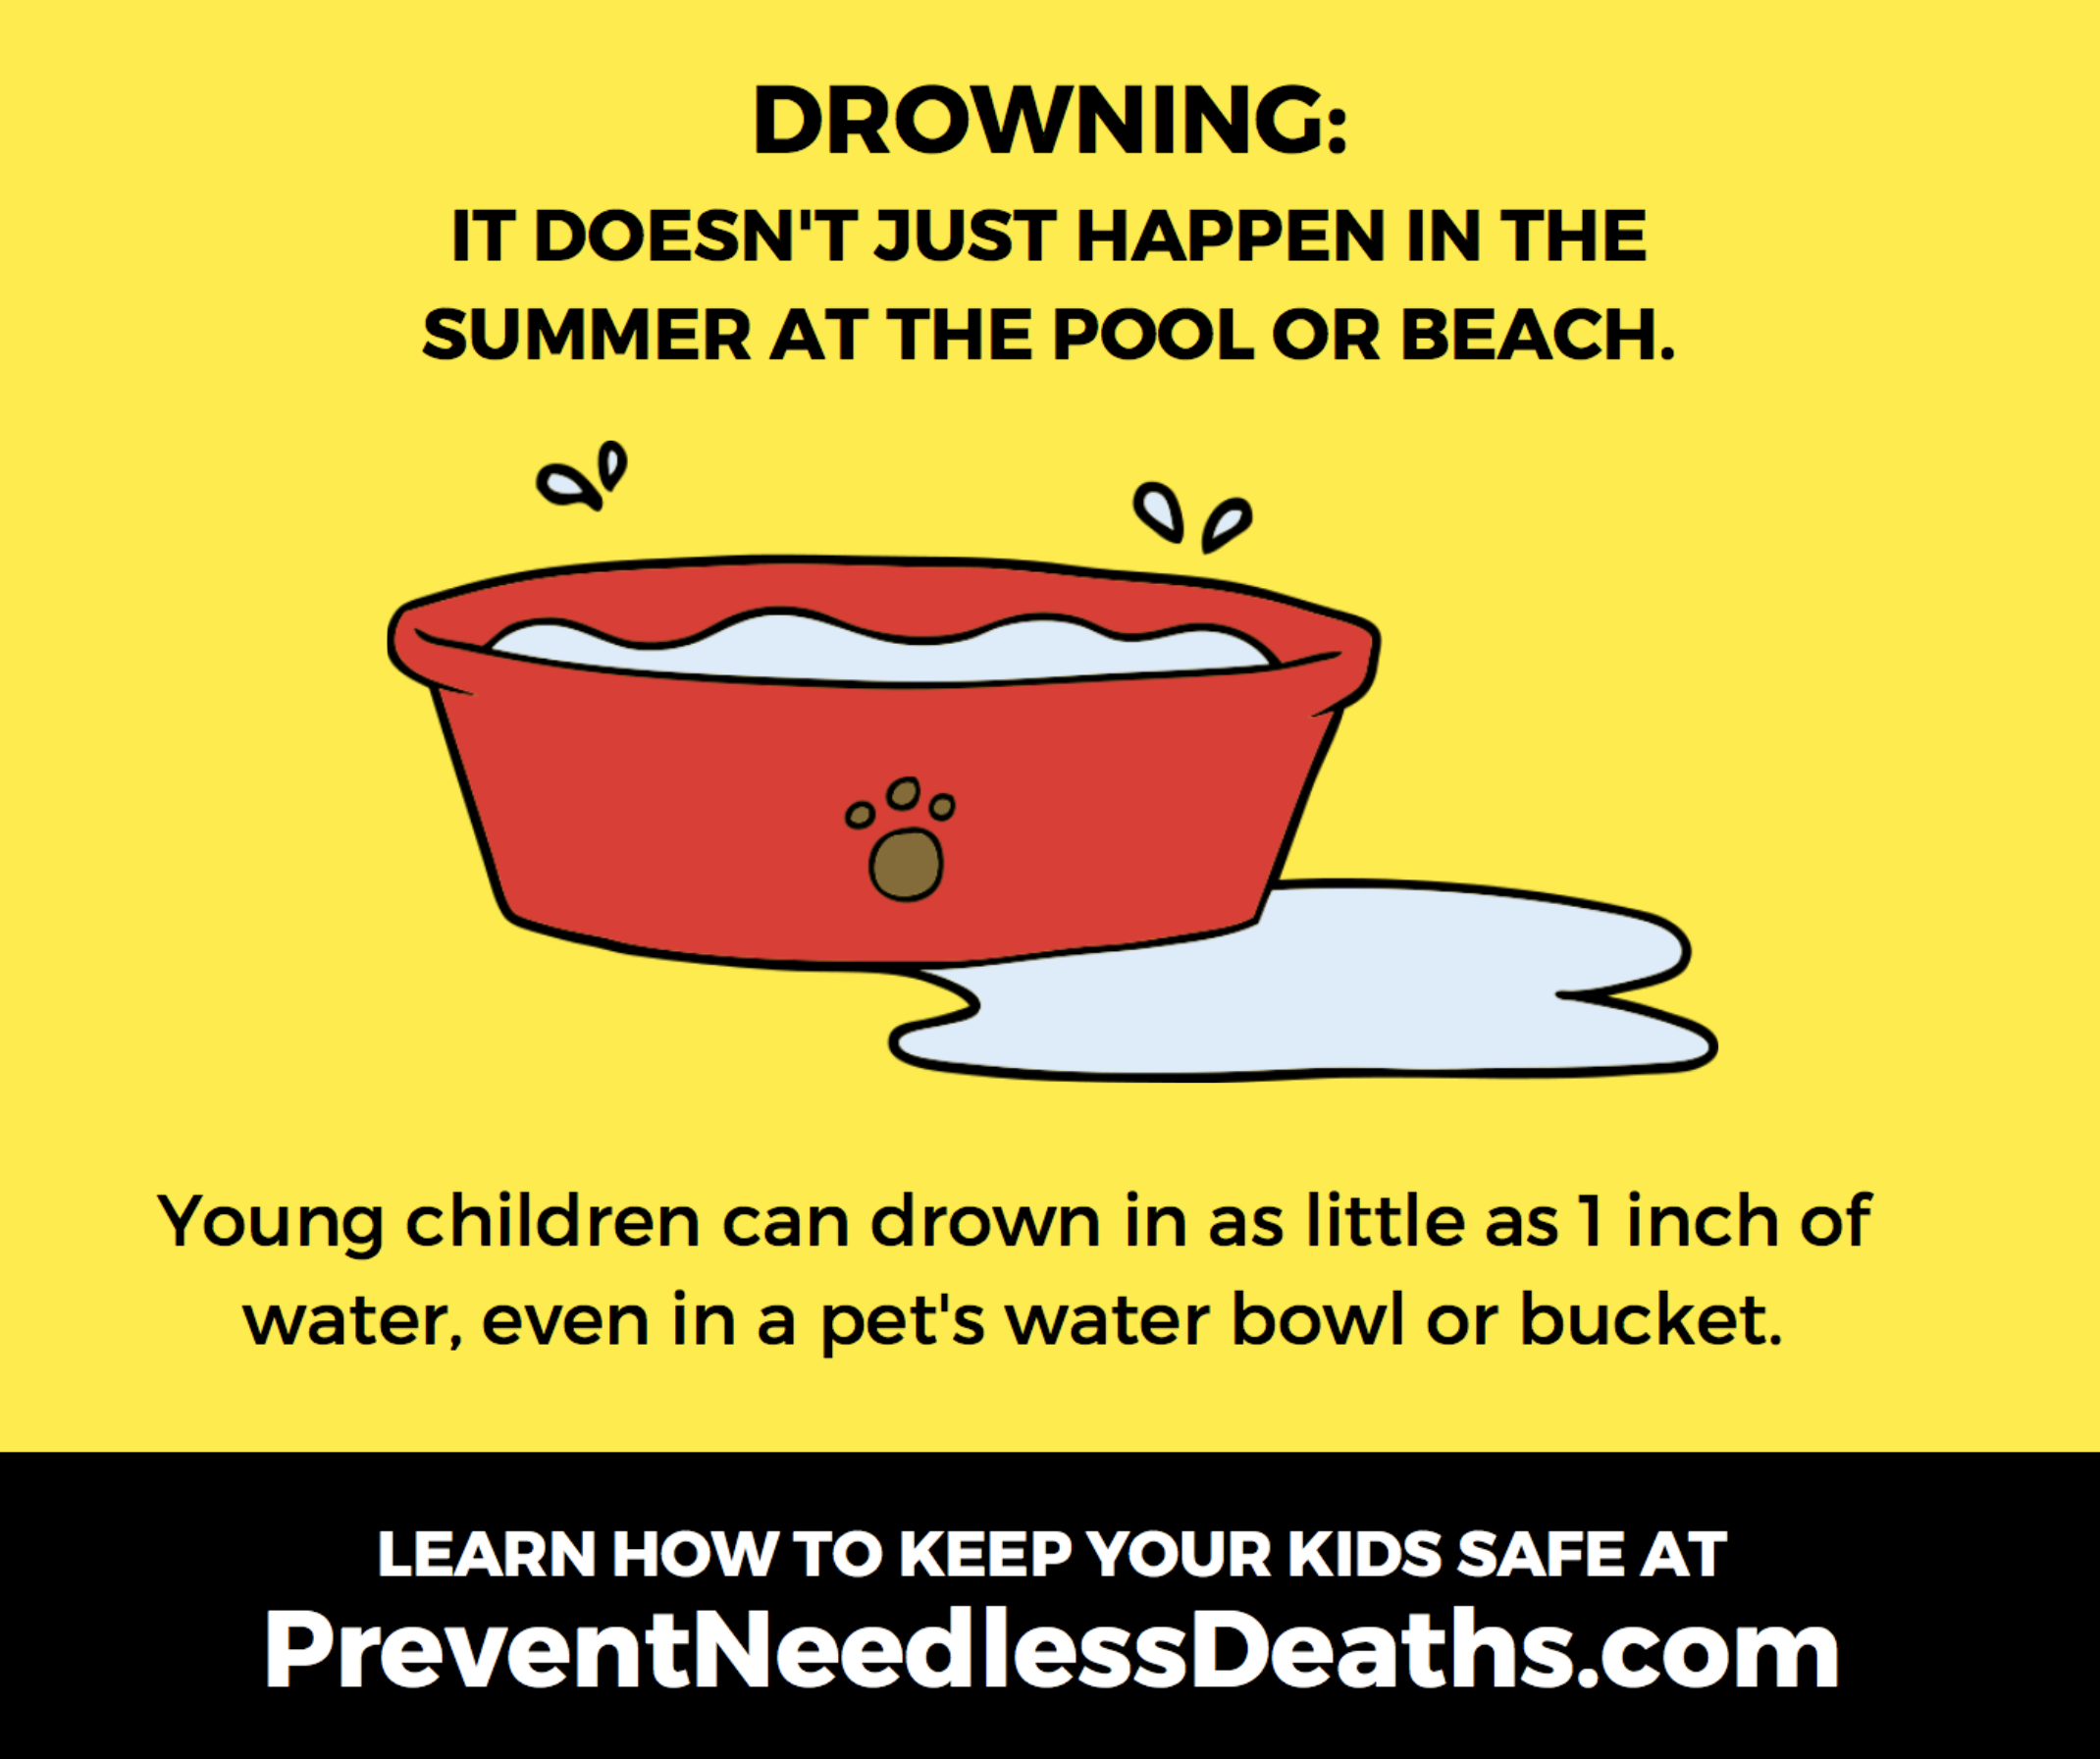 young children can drown in 1 inch of water